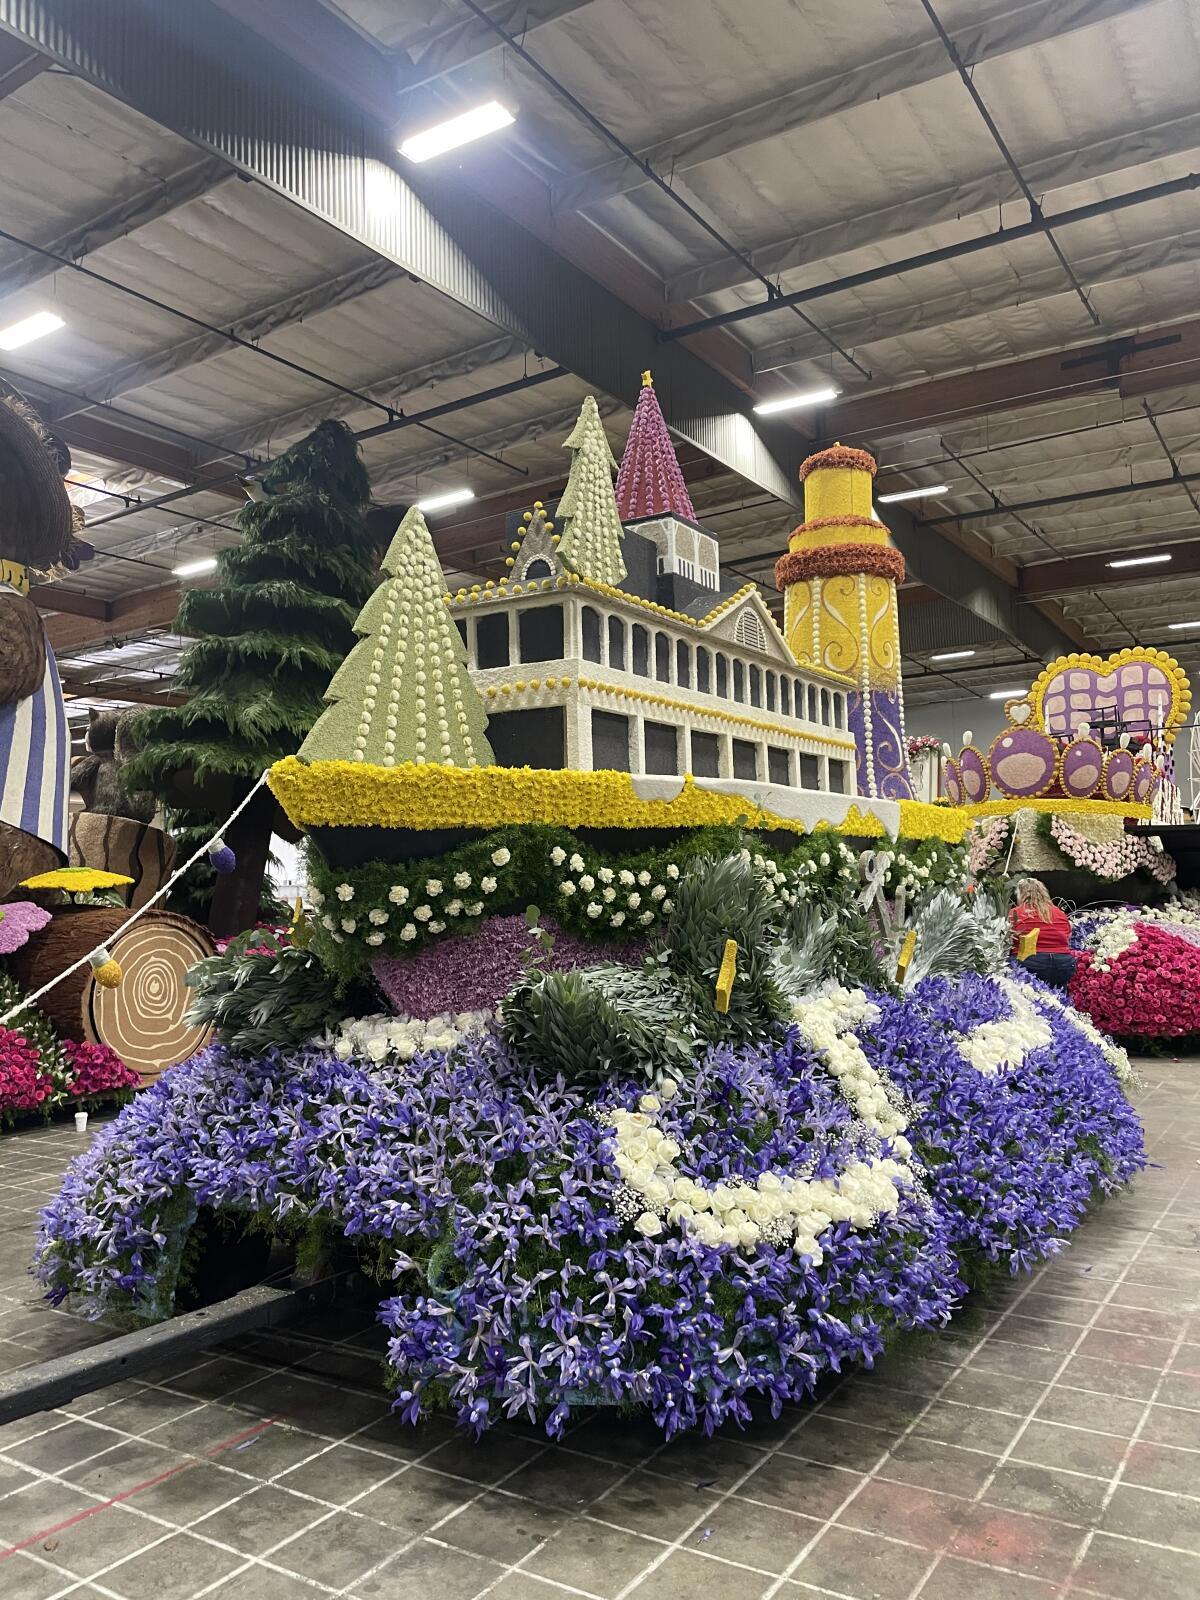 A finished section of the “Jingle on the Waves” float pays homage to the Balboa Pavilion.